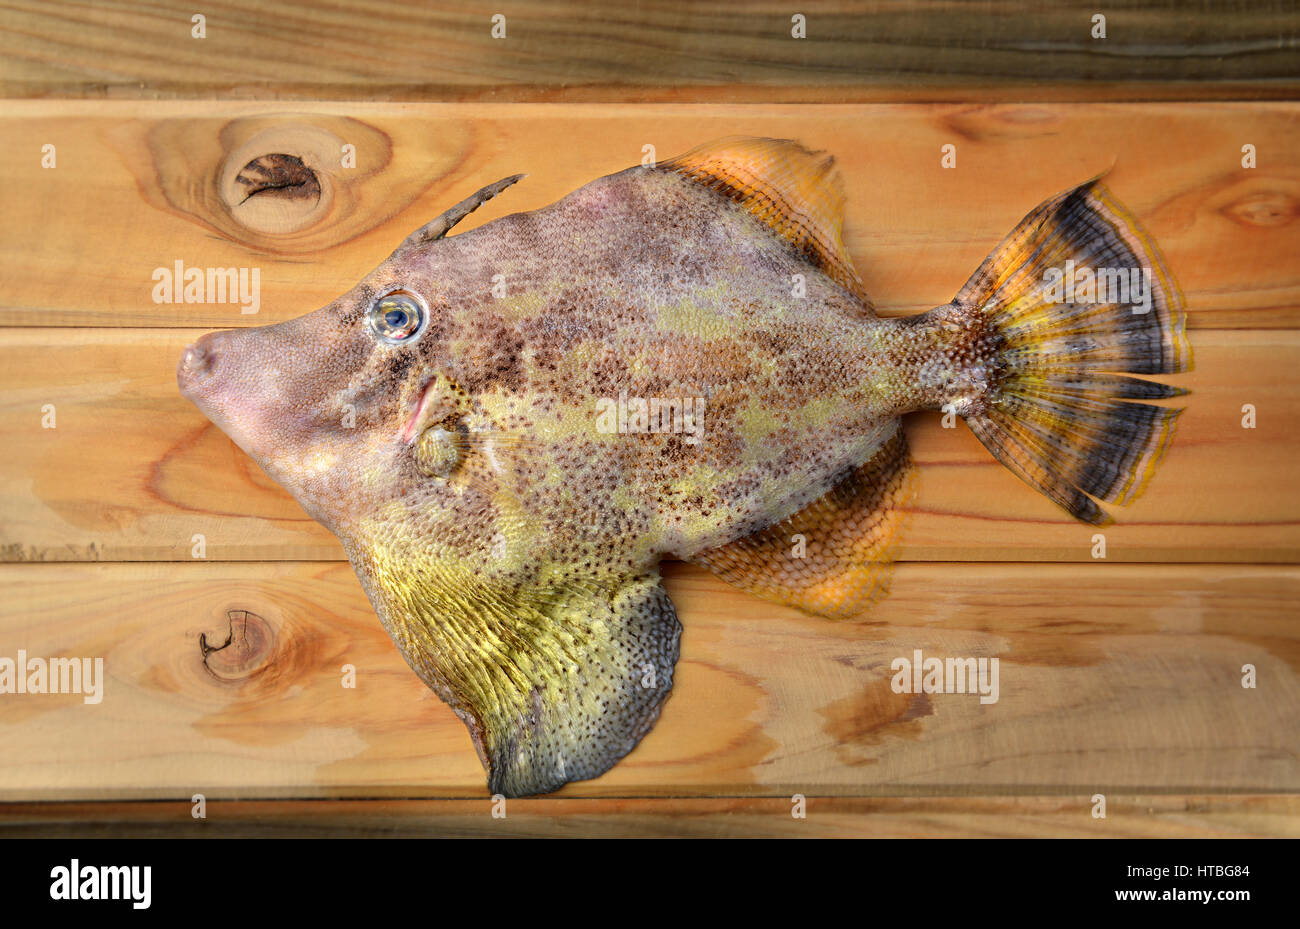 seafood fresh monacanthidae fish from market on wooden and photo in sunlight Stock Photo